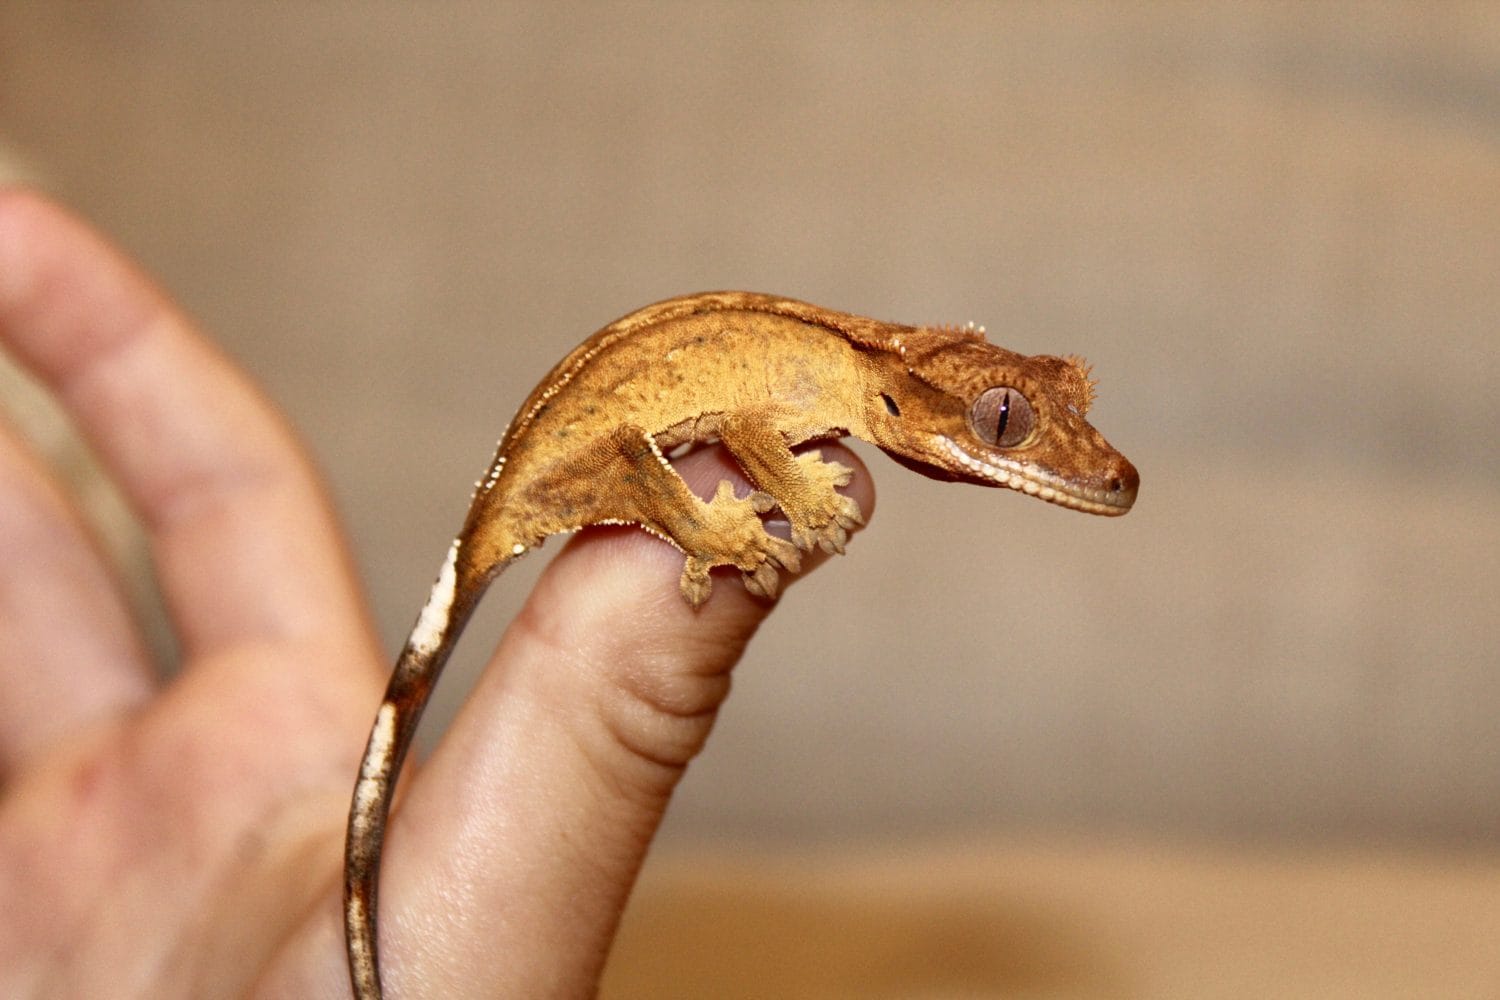 Baby Crested Gecko Lizard Reptile